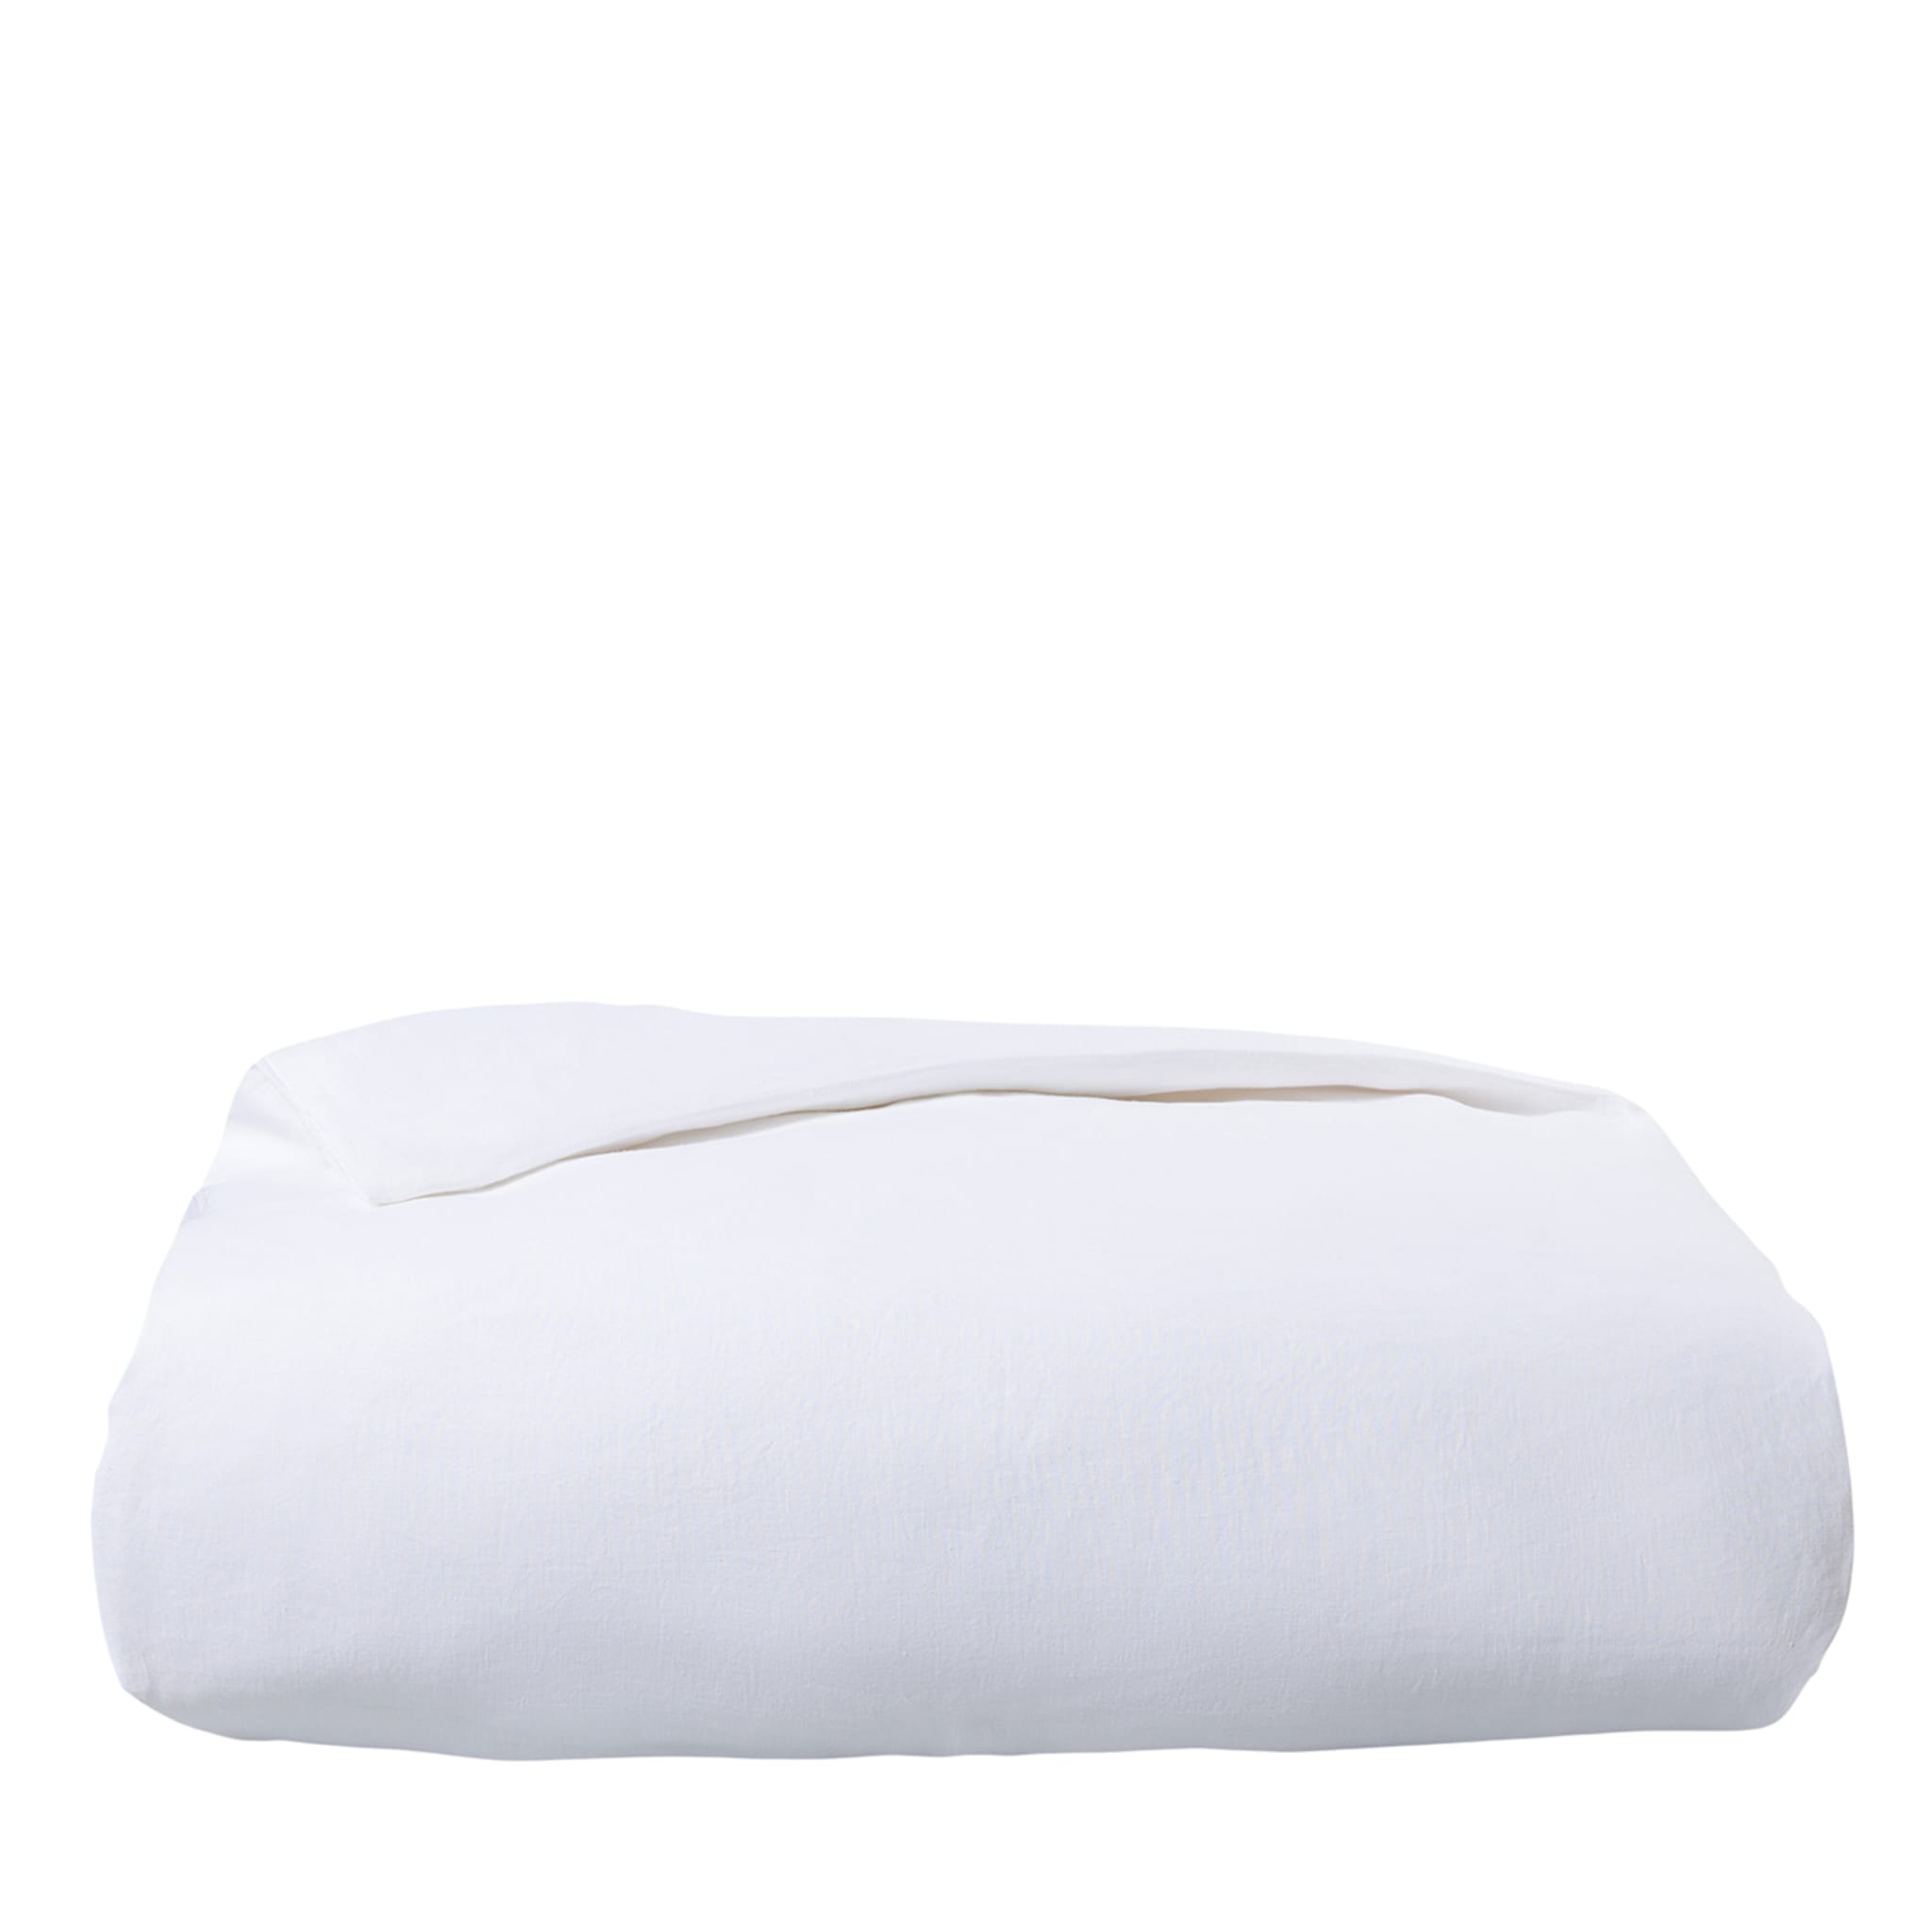 Kanapa White Double Bed Duvet Cover - Main view